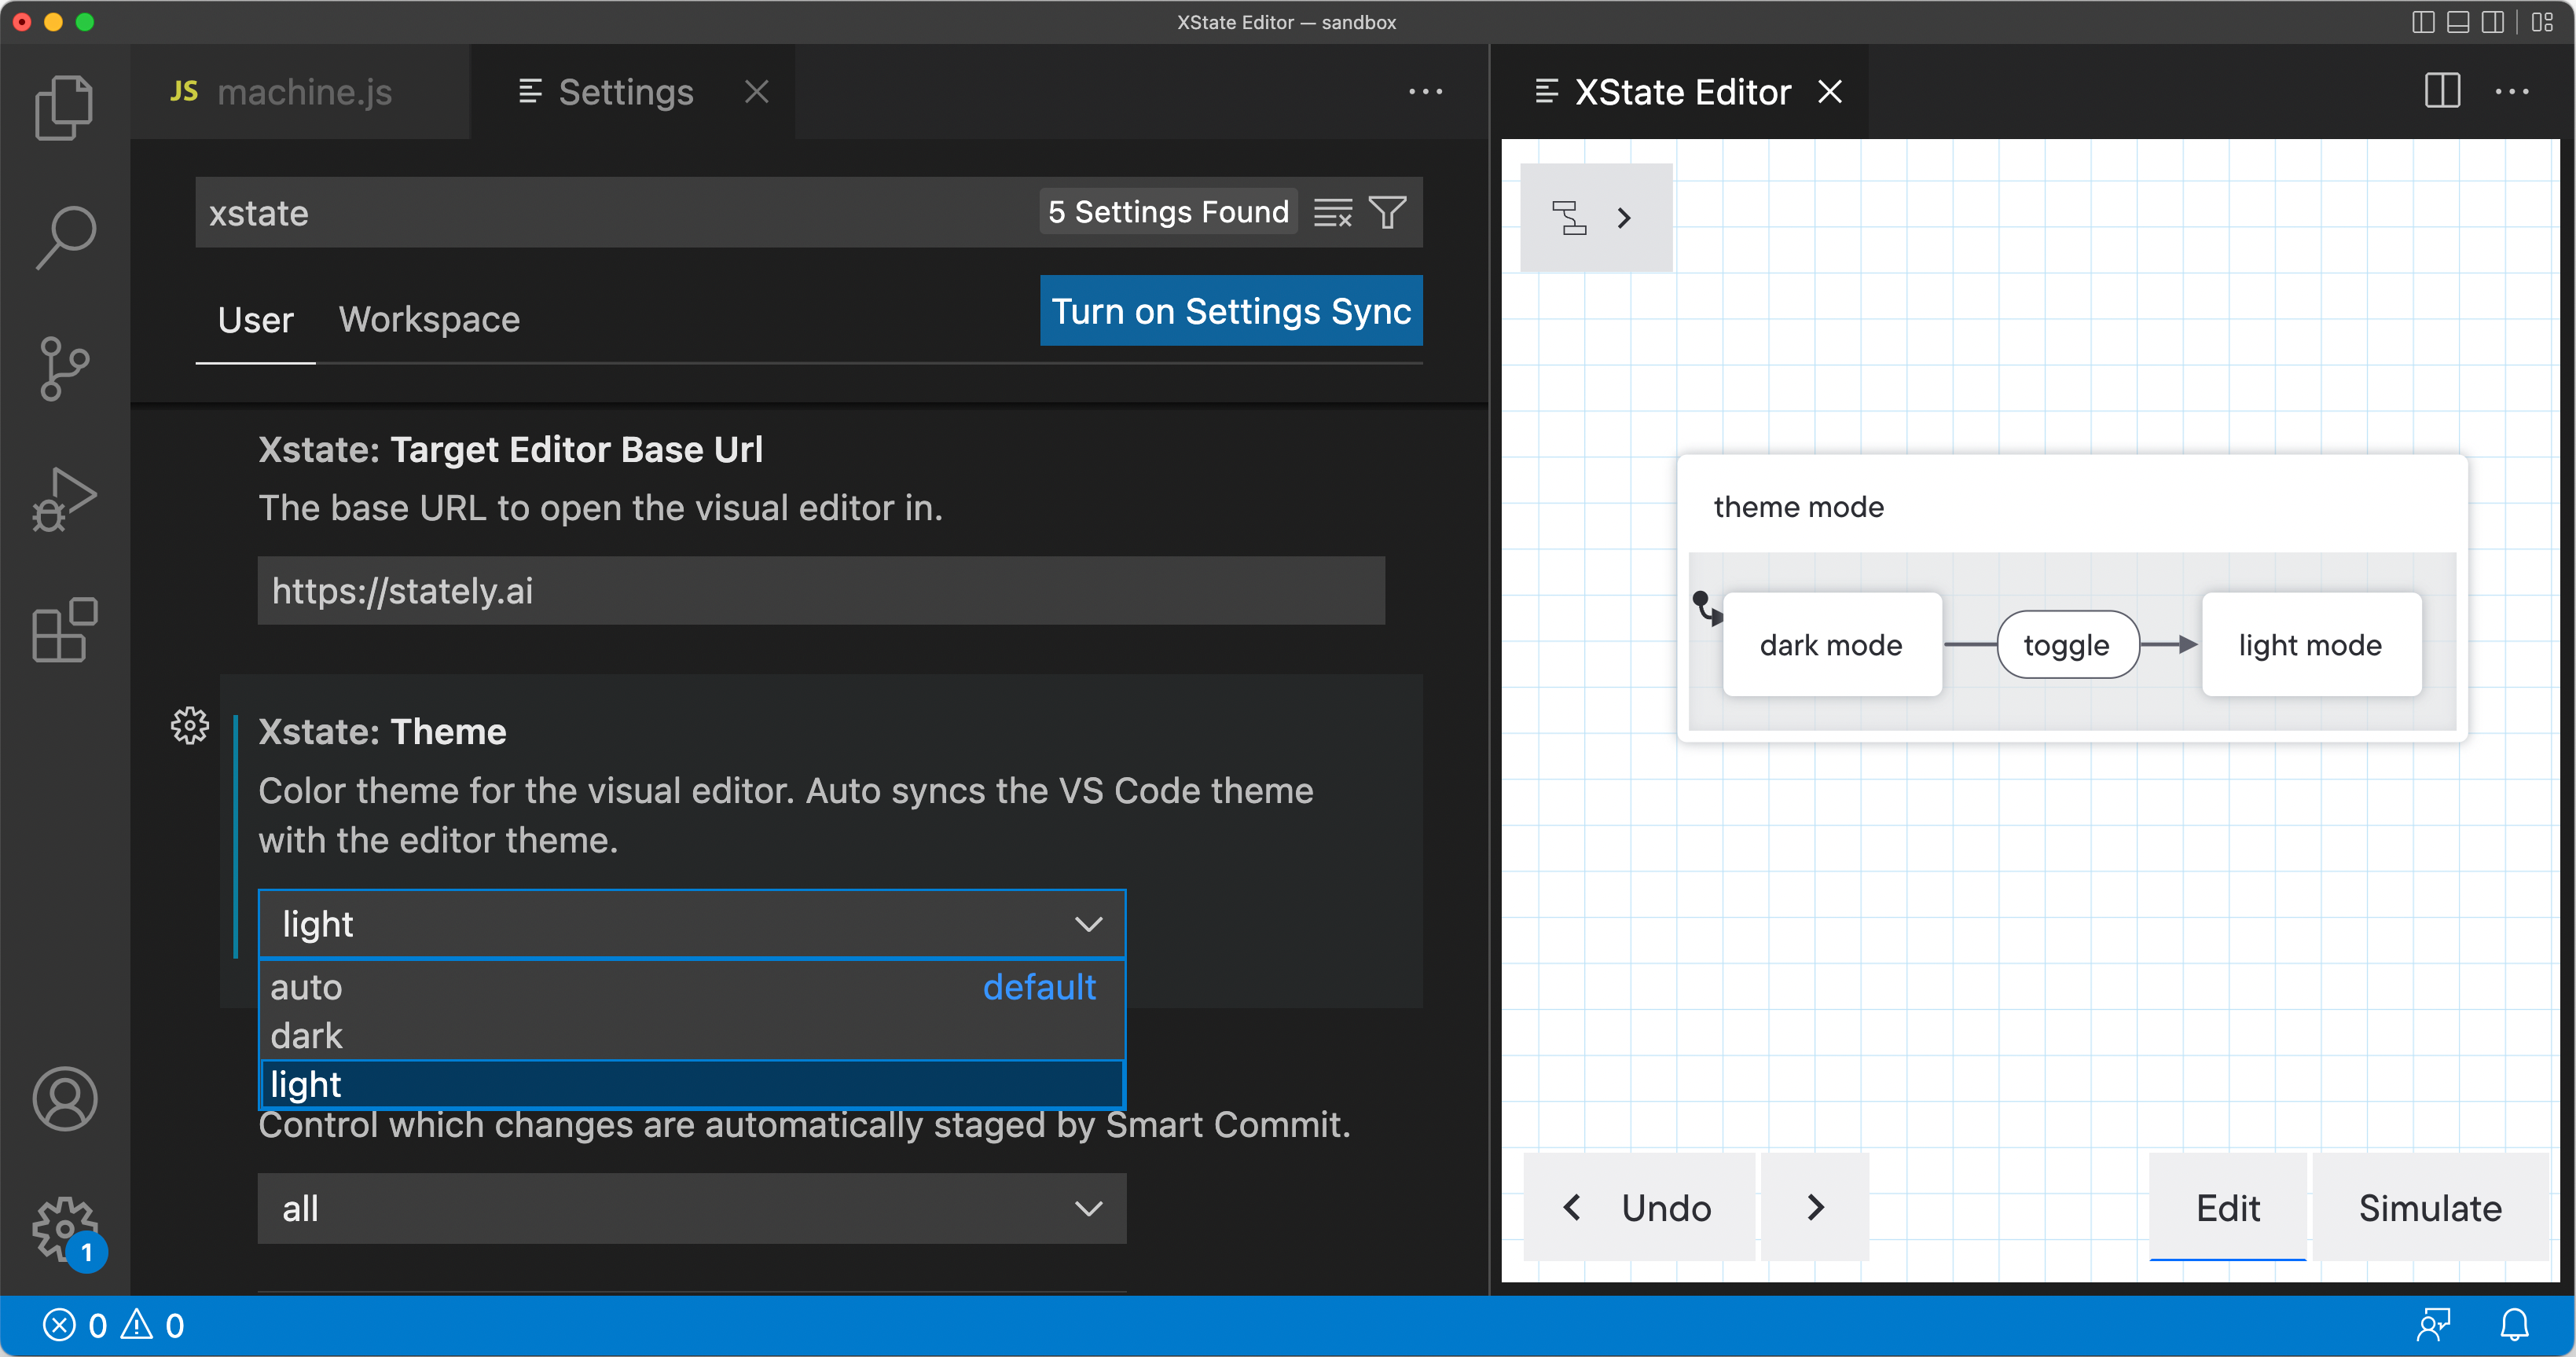 The XState: theme setting in VSCode is set to light and the visual editor is in light mode.